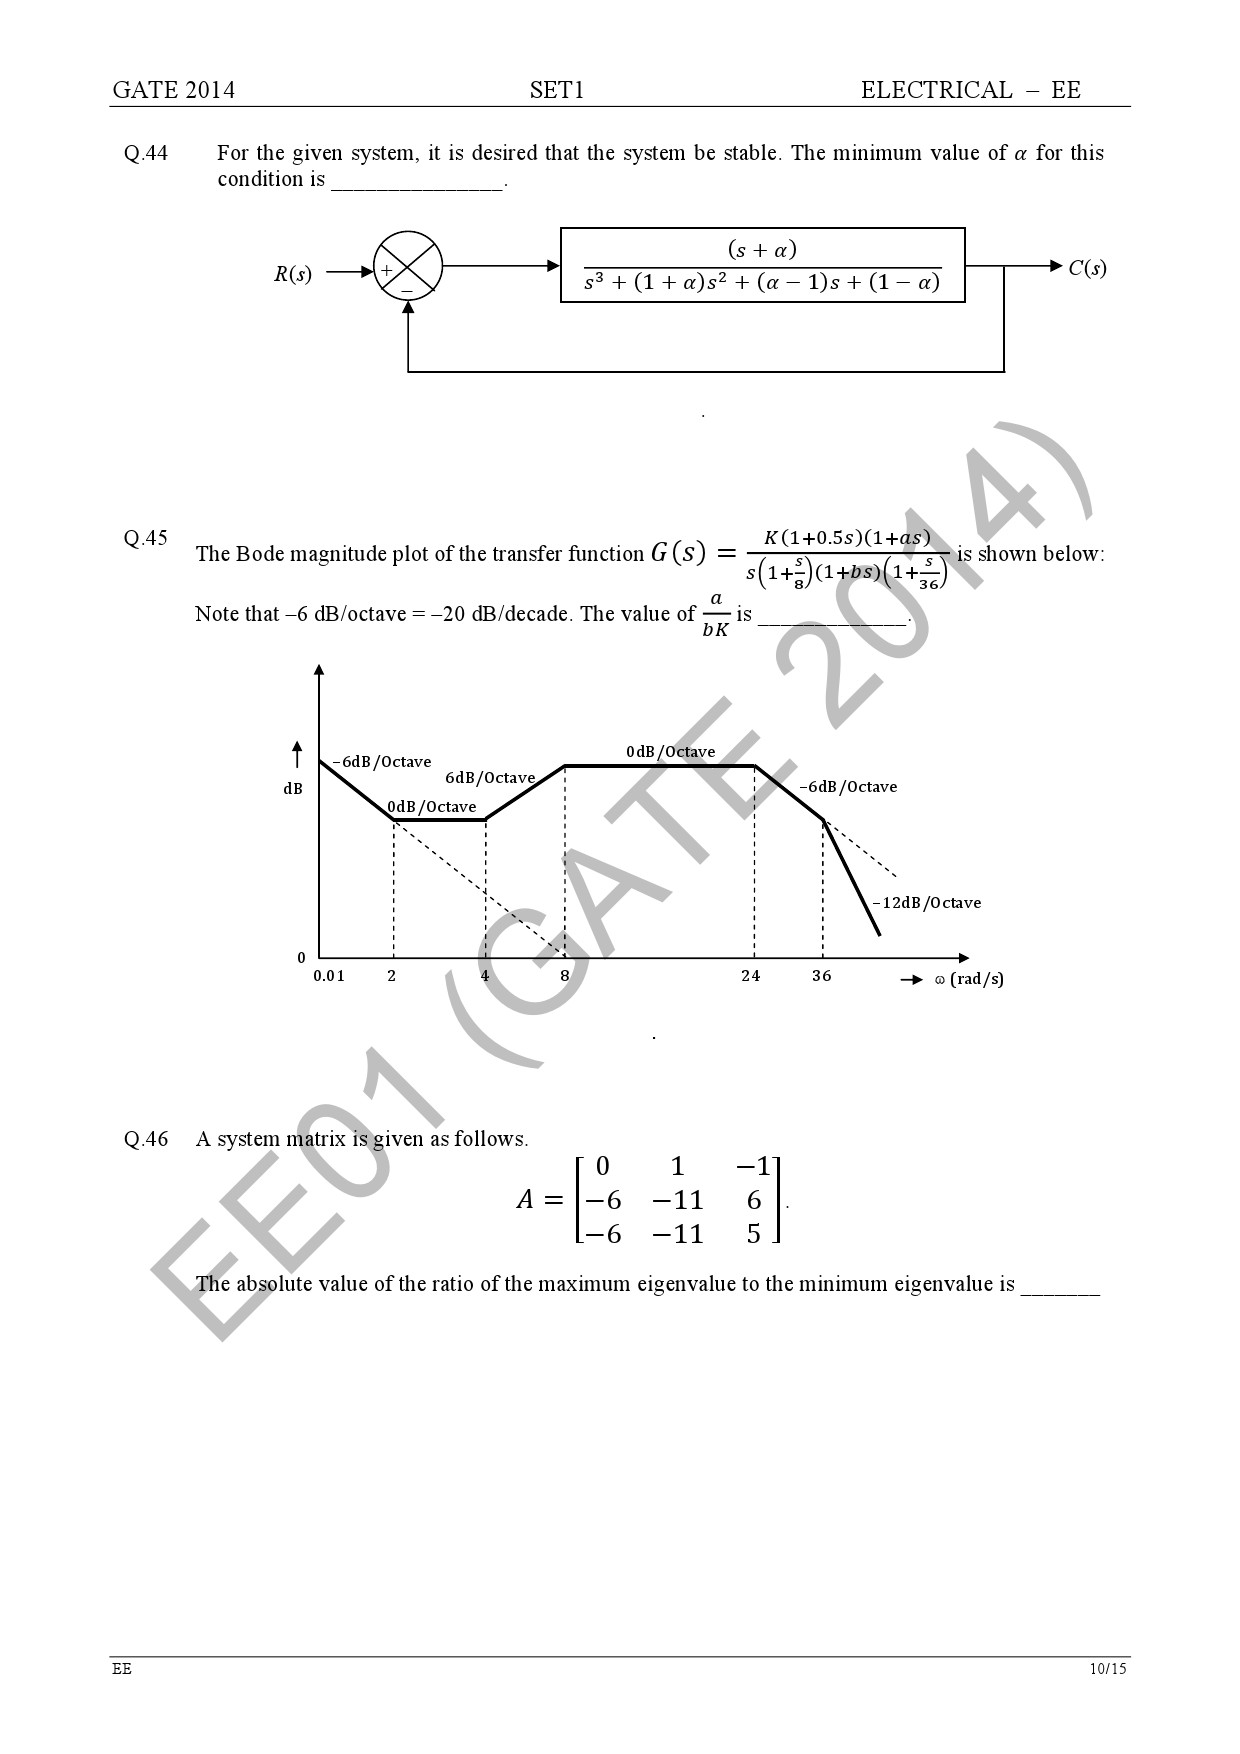 GATE Exam Question Paper 2014 Electrical Engineering Set 1 16